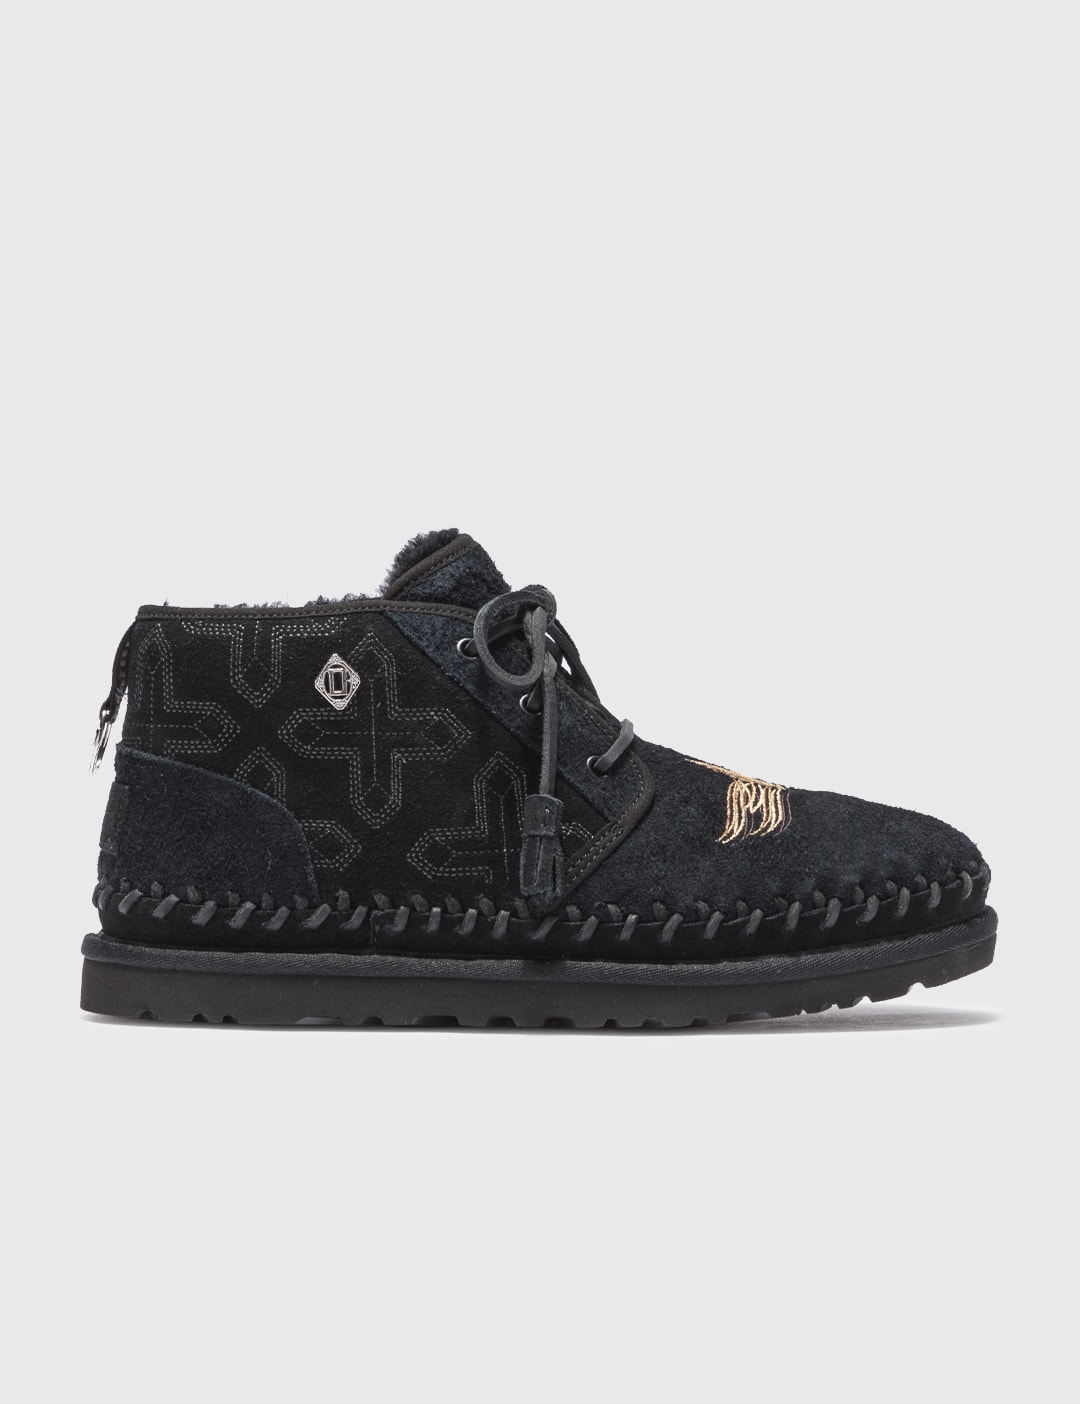 Ugg x Children Of the Discordance Neumel Boots Placeholder Image